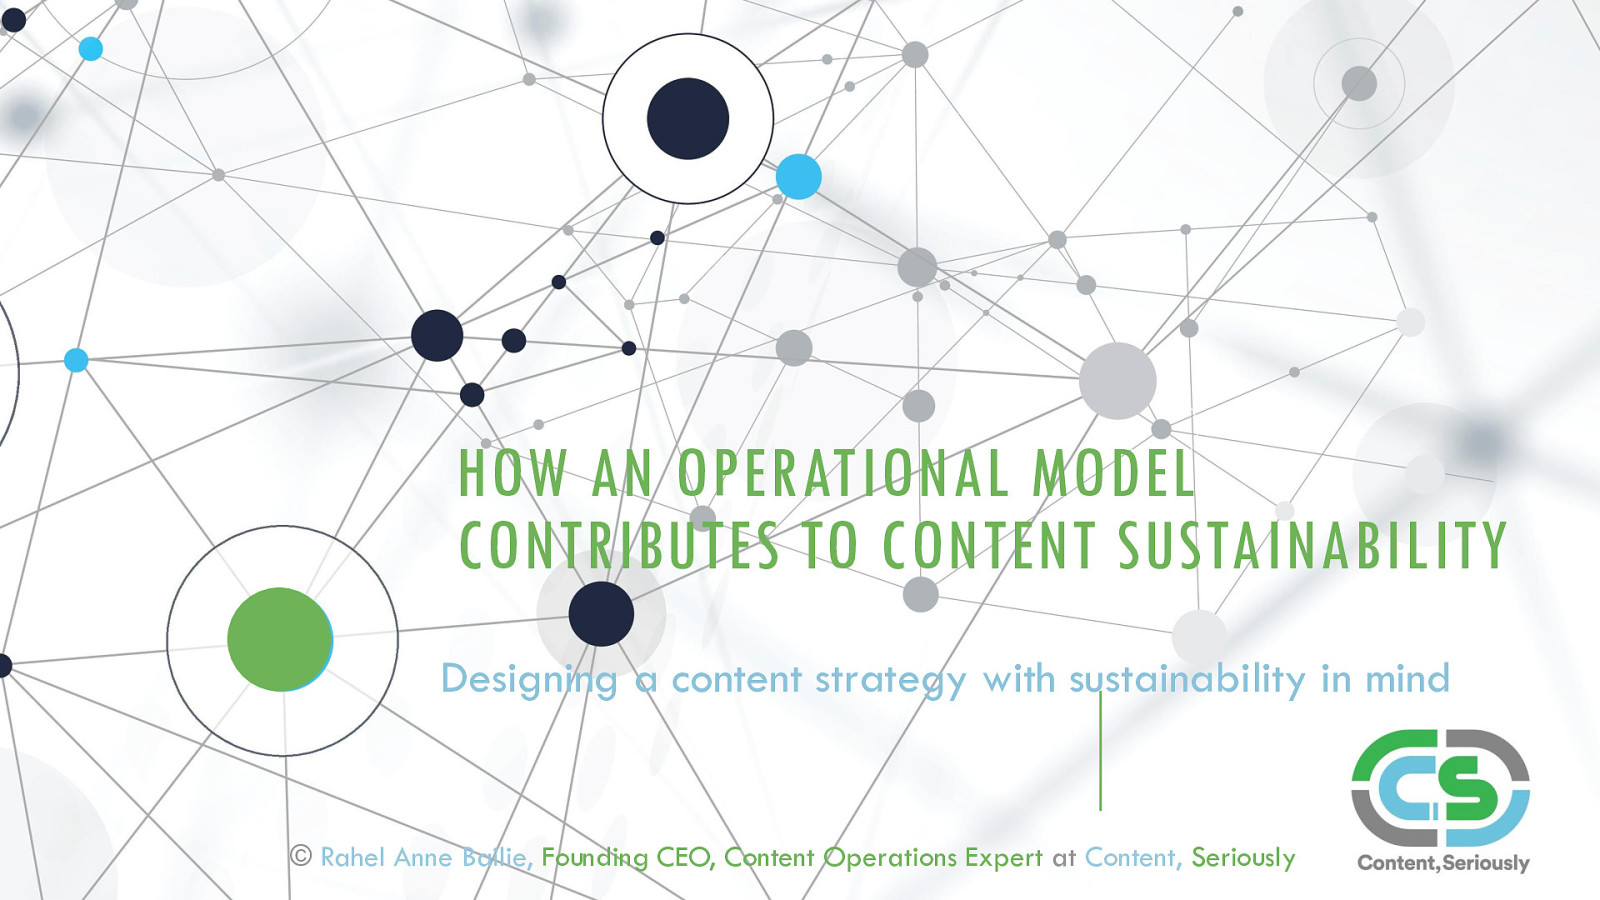 How Content Operations Contributes to Sustainability